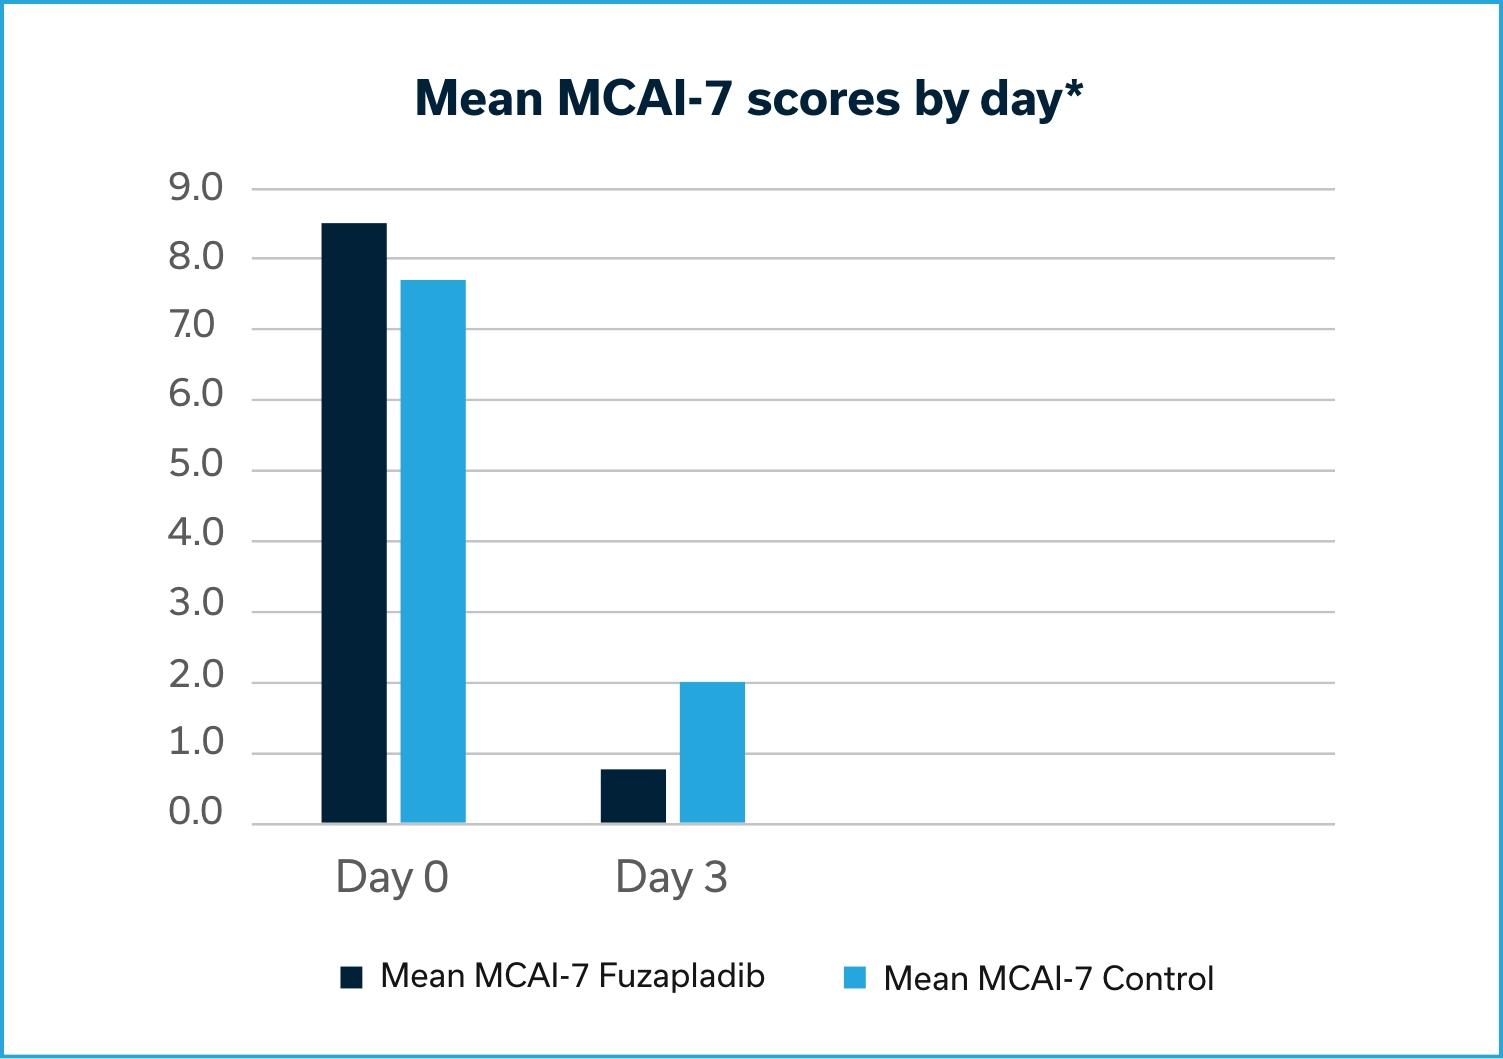 Mean MCAI-7 scores by day.